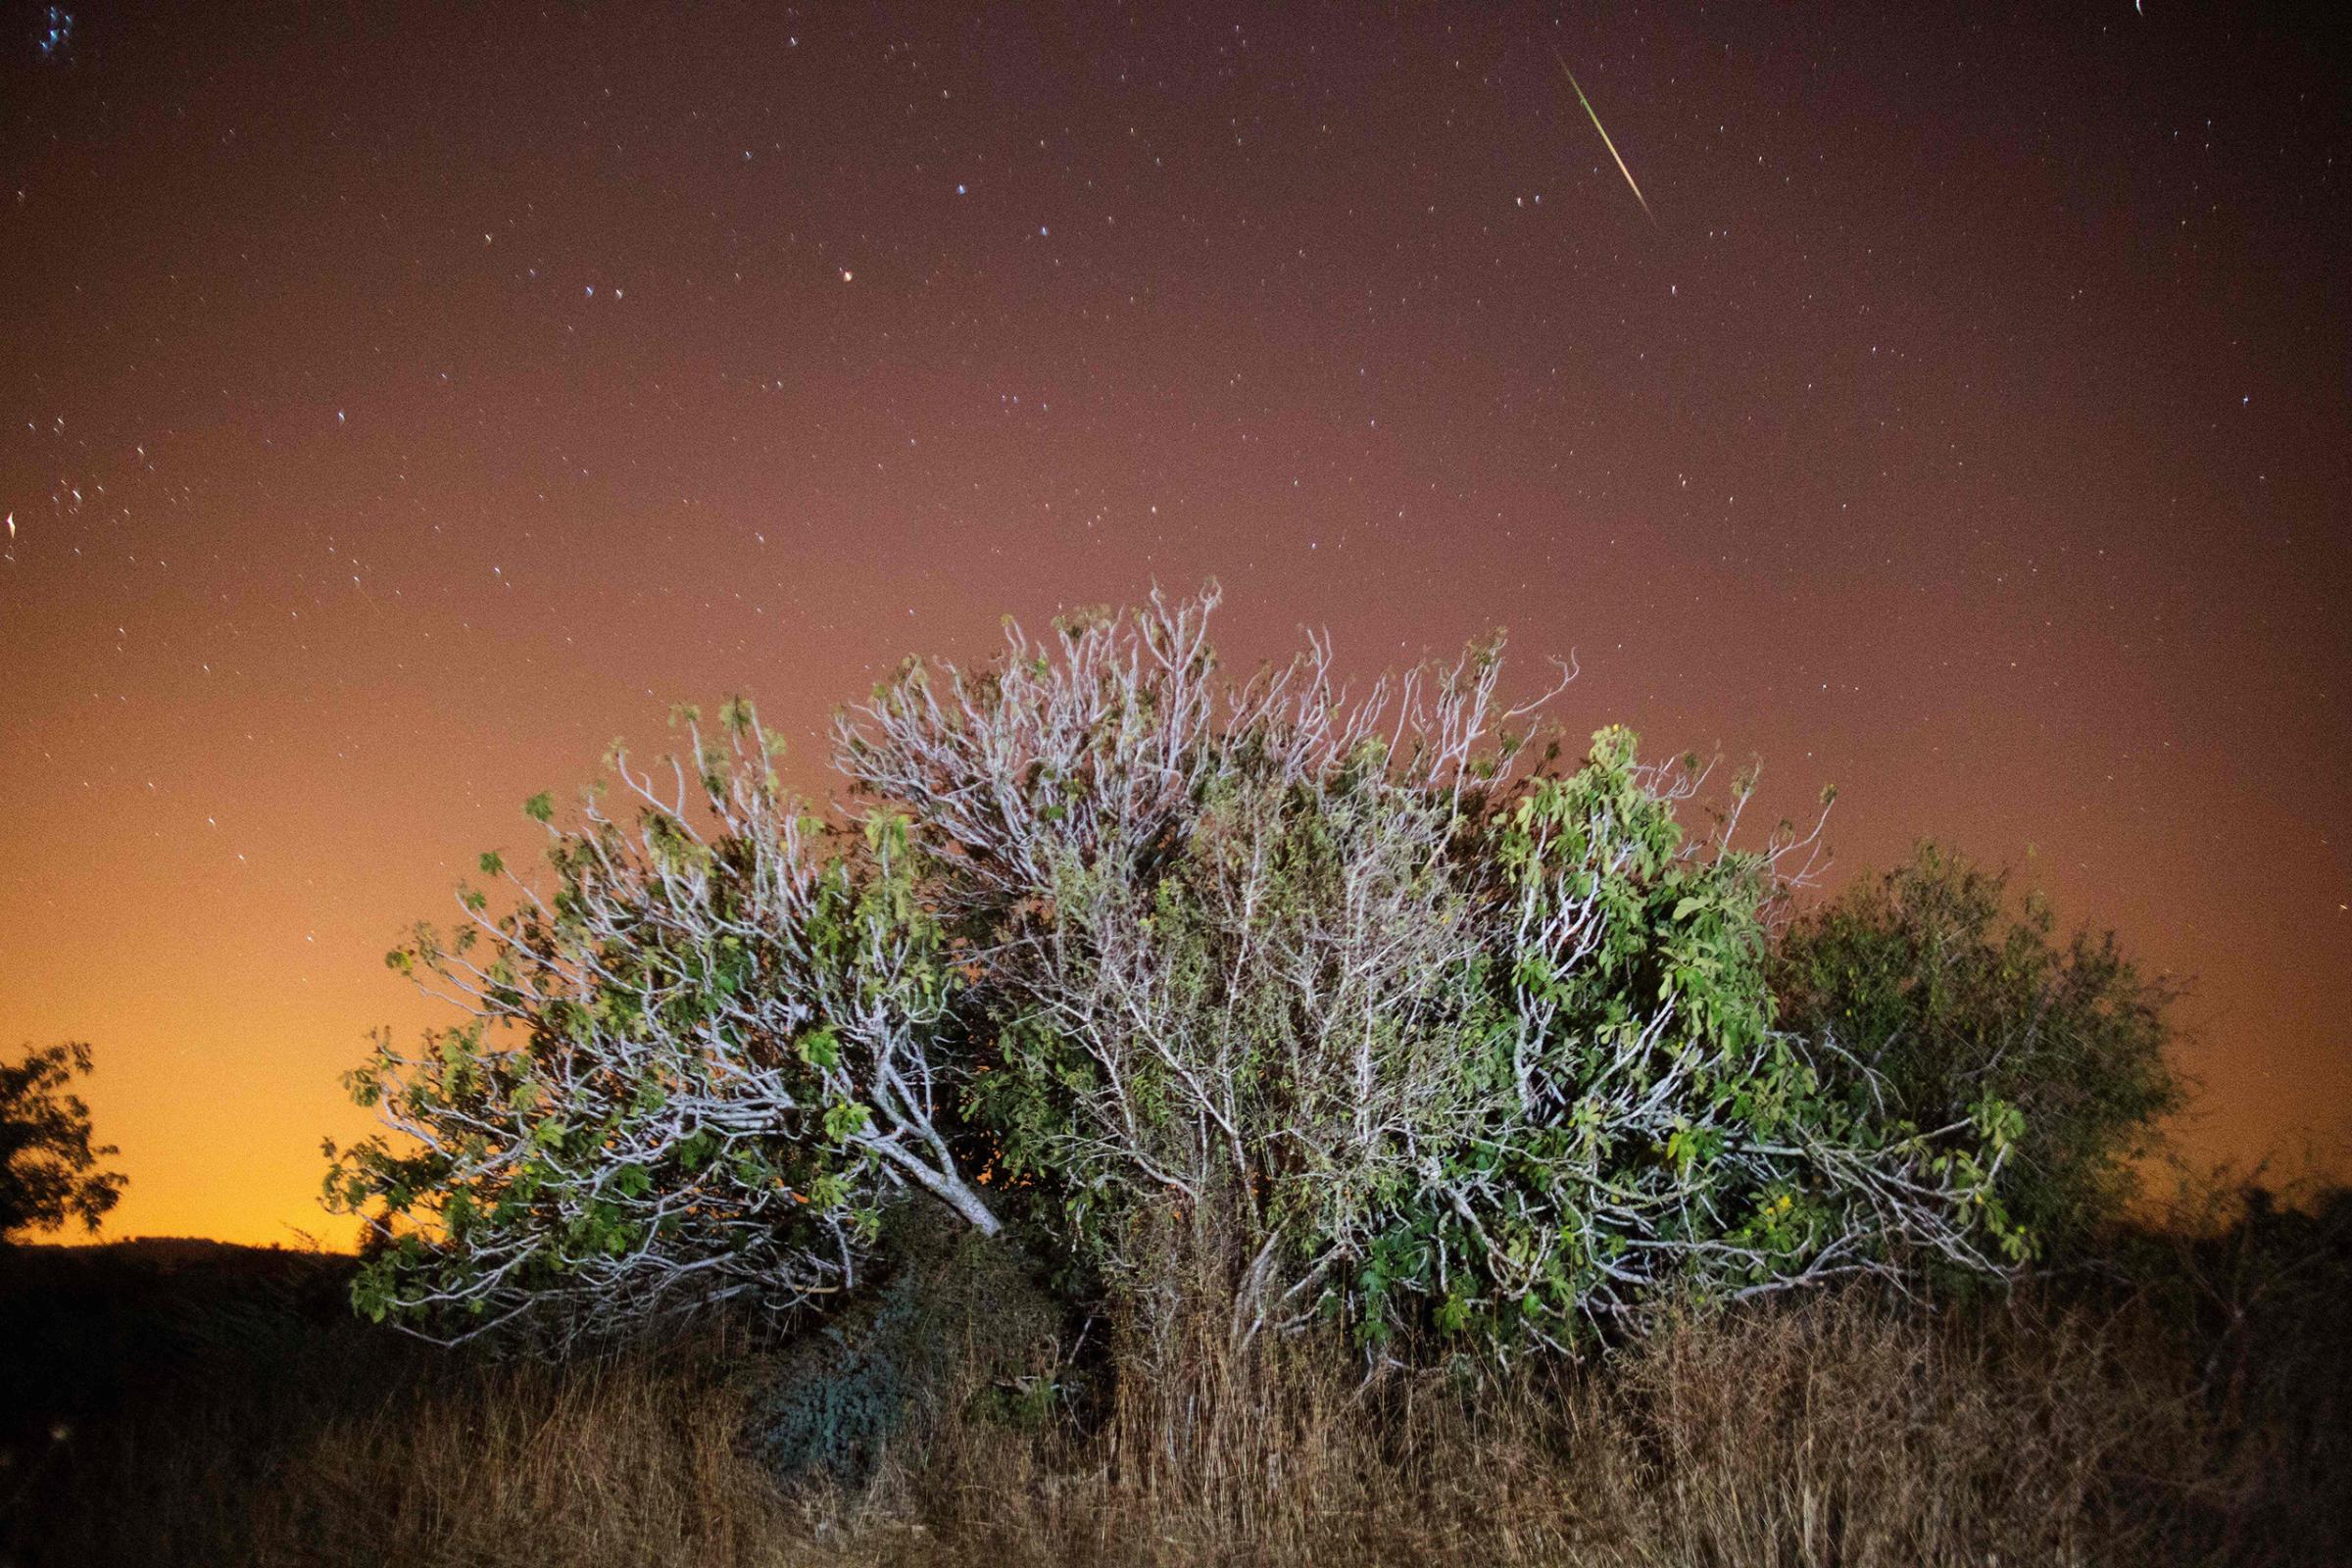 A Perseid meteor streaks across the sky above trees in the central Israeli village of Luzit on Aug. 12, 2016.